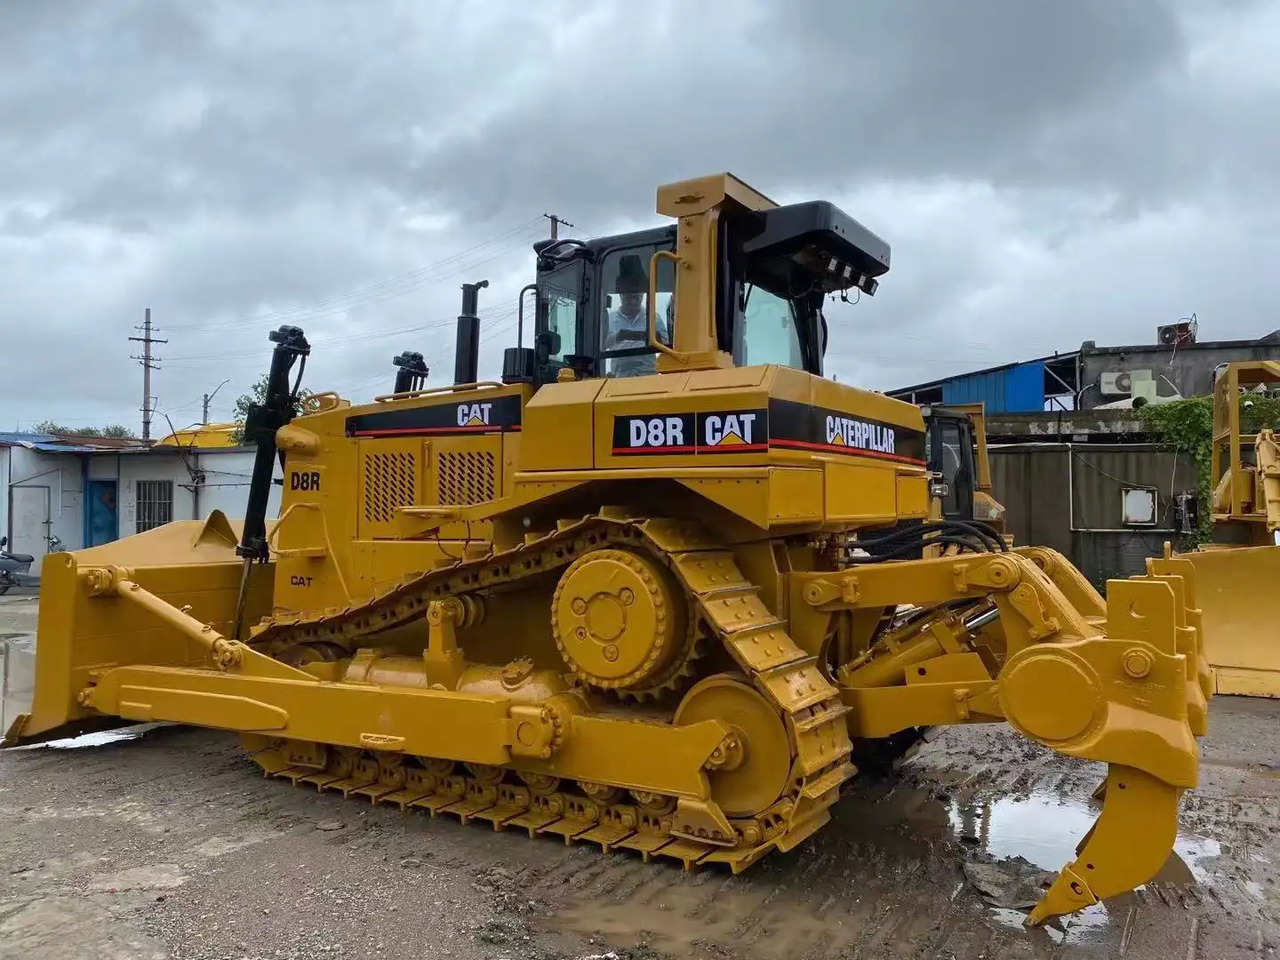 Used cat d8r bulldozer D8R D9R D6R D7R caterpillar used d7g d6g bulldozer cheap price for sale - Bulldozer: picture 4